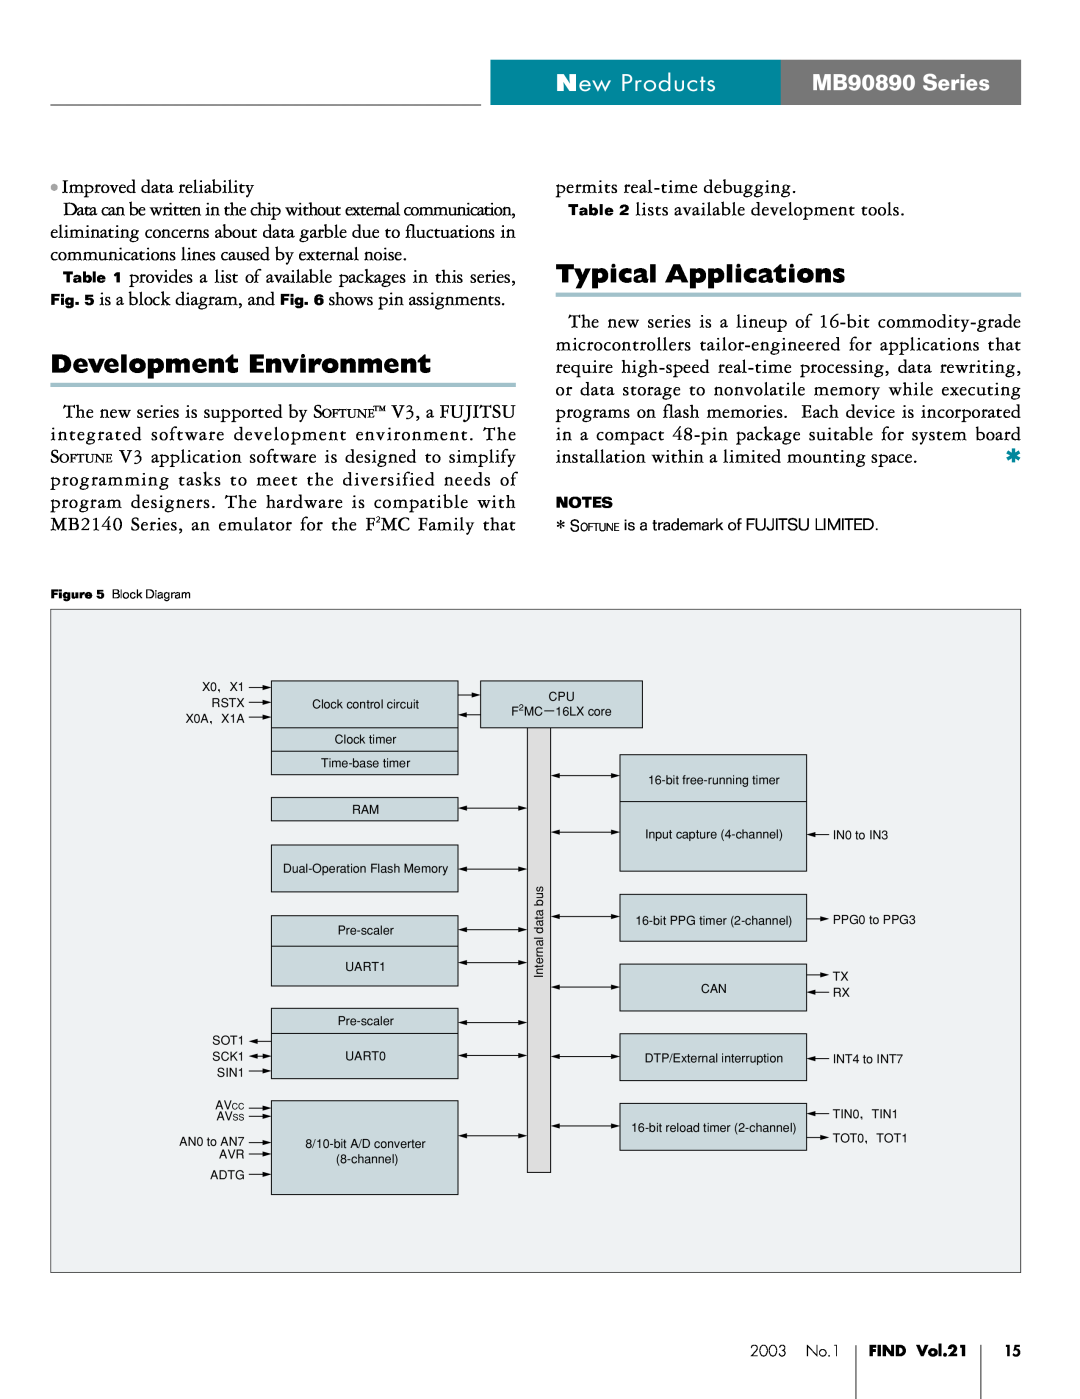 Fujitsu manual Development Environment, Typical Applications, New Products, MB90890 Series 